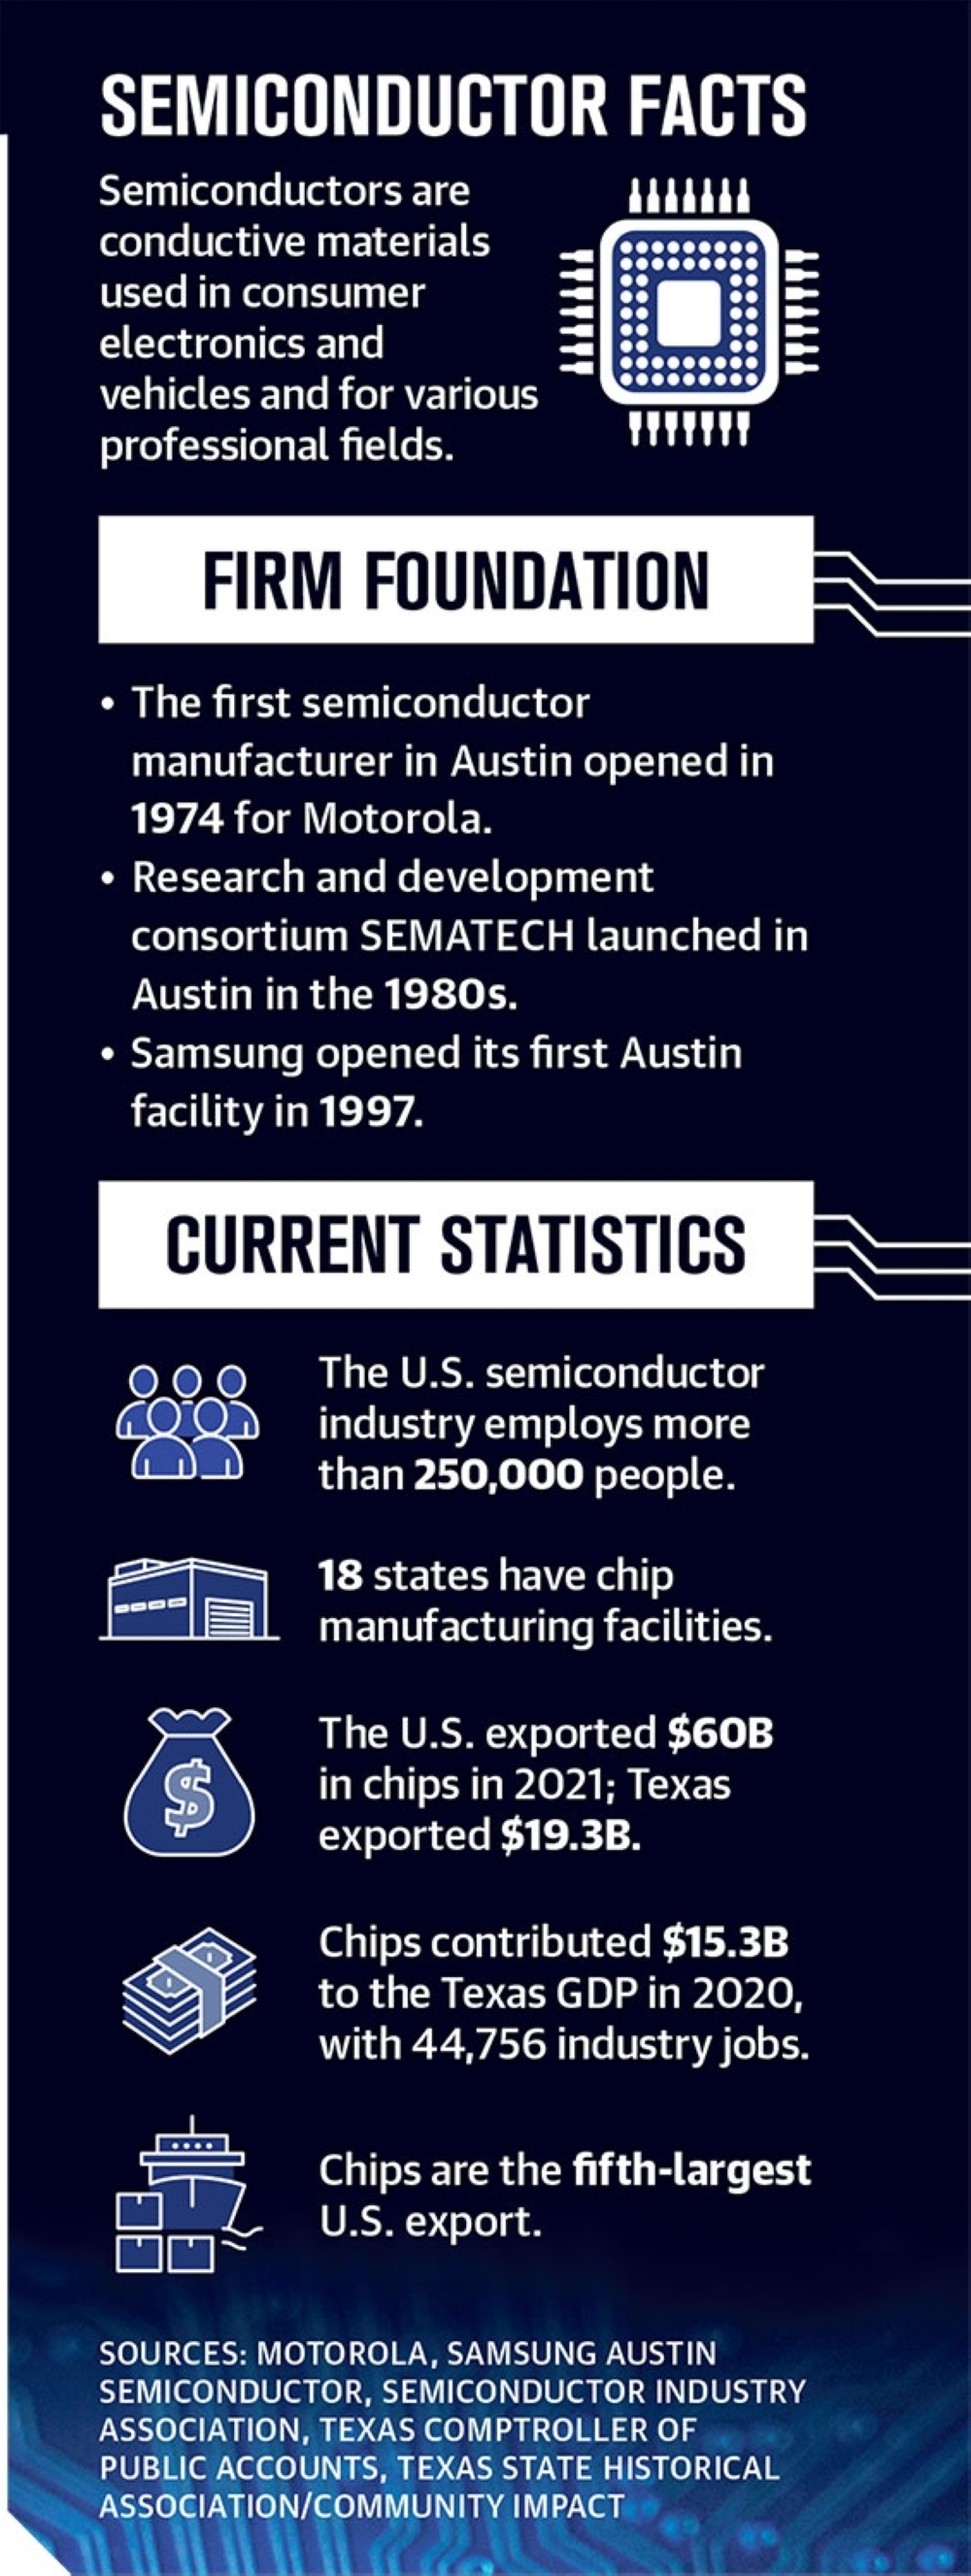 When it comes to growing industry in South Texas, how much is too much?